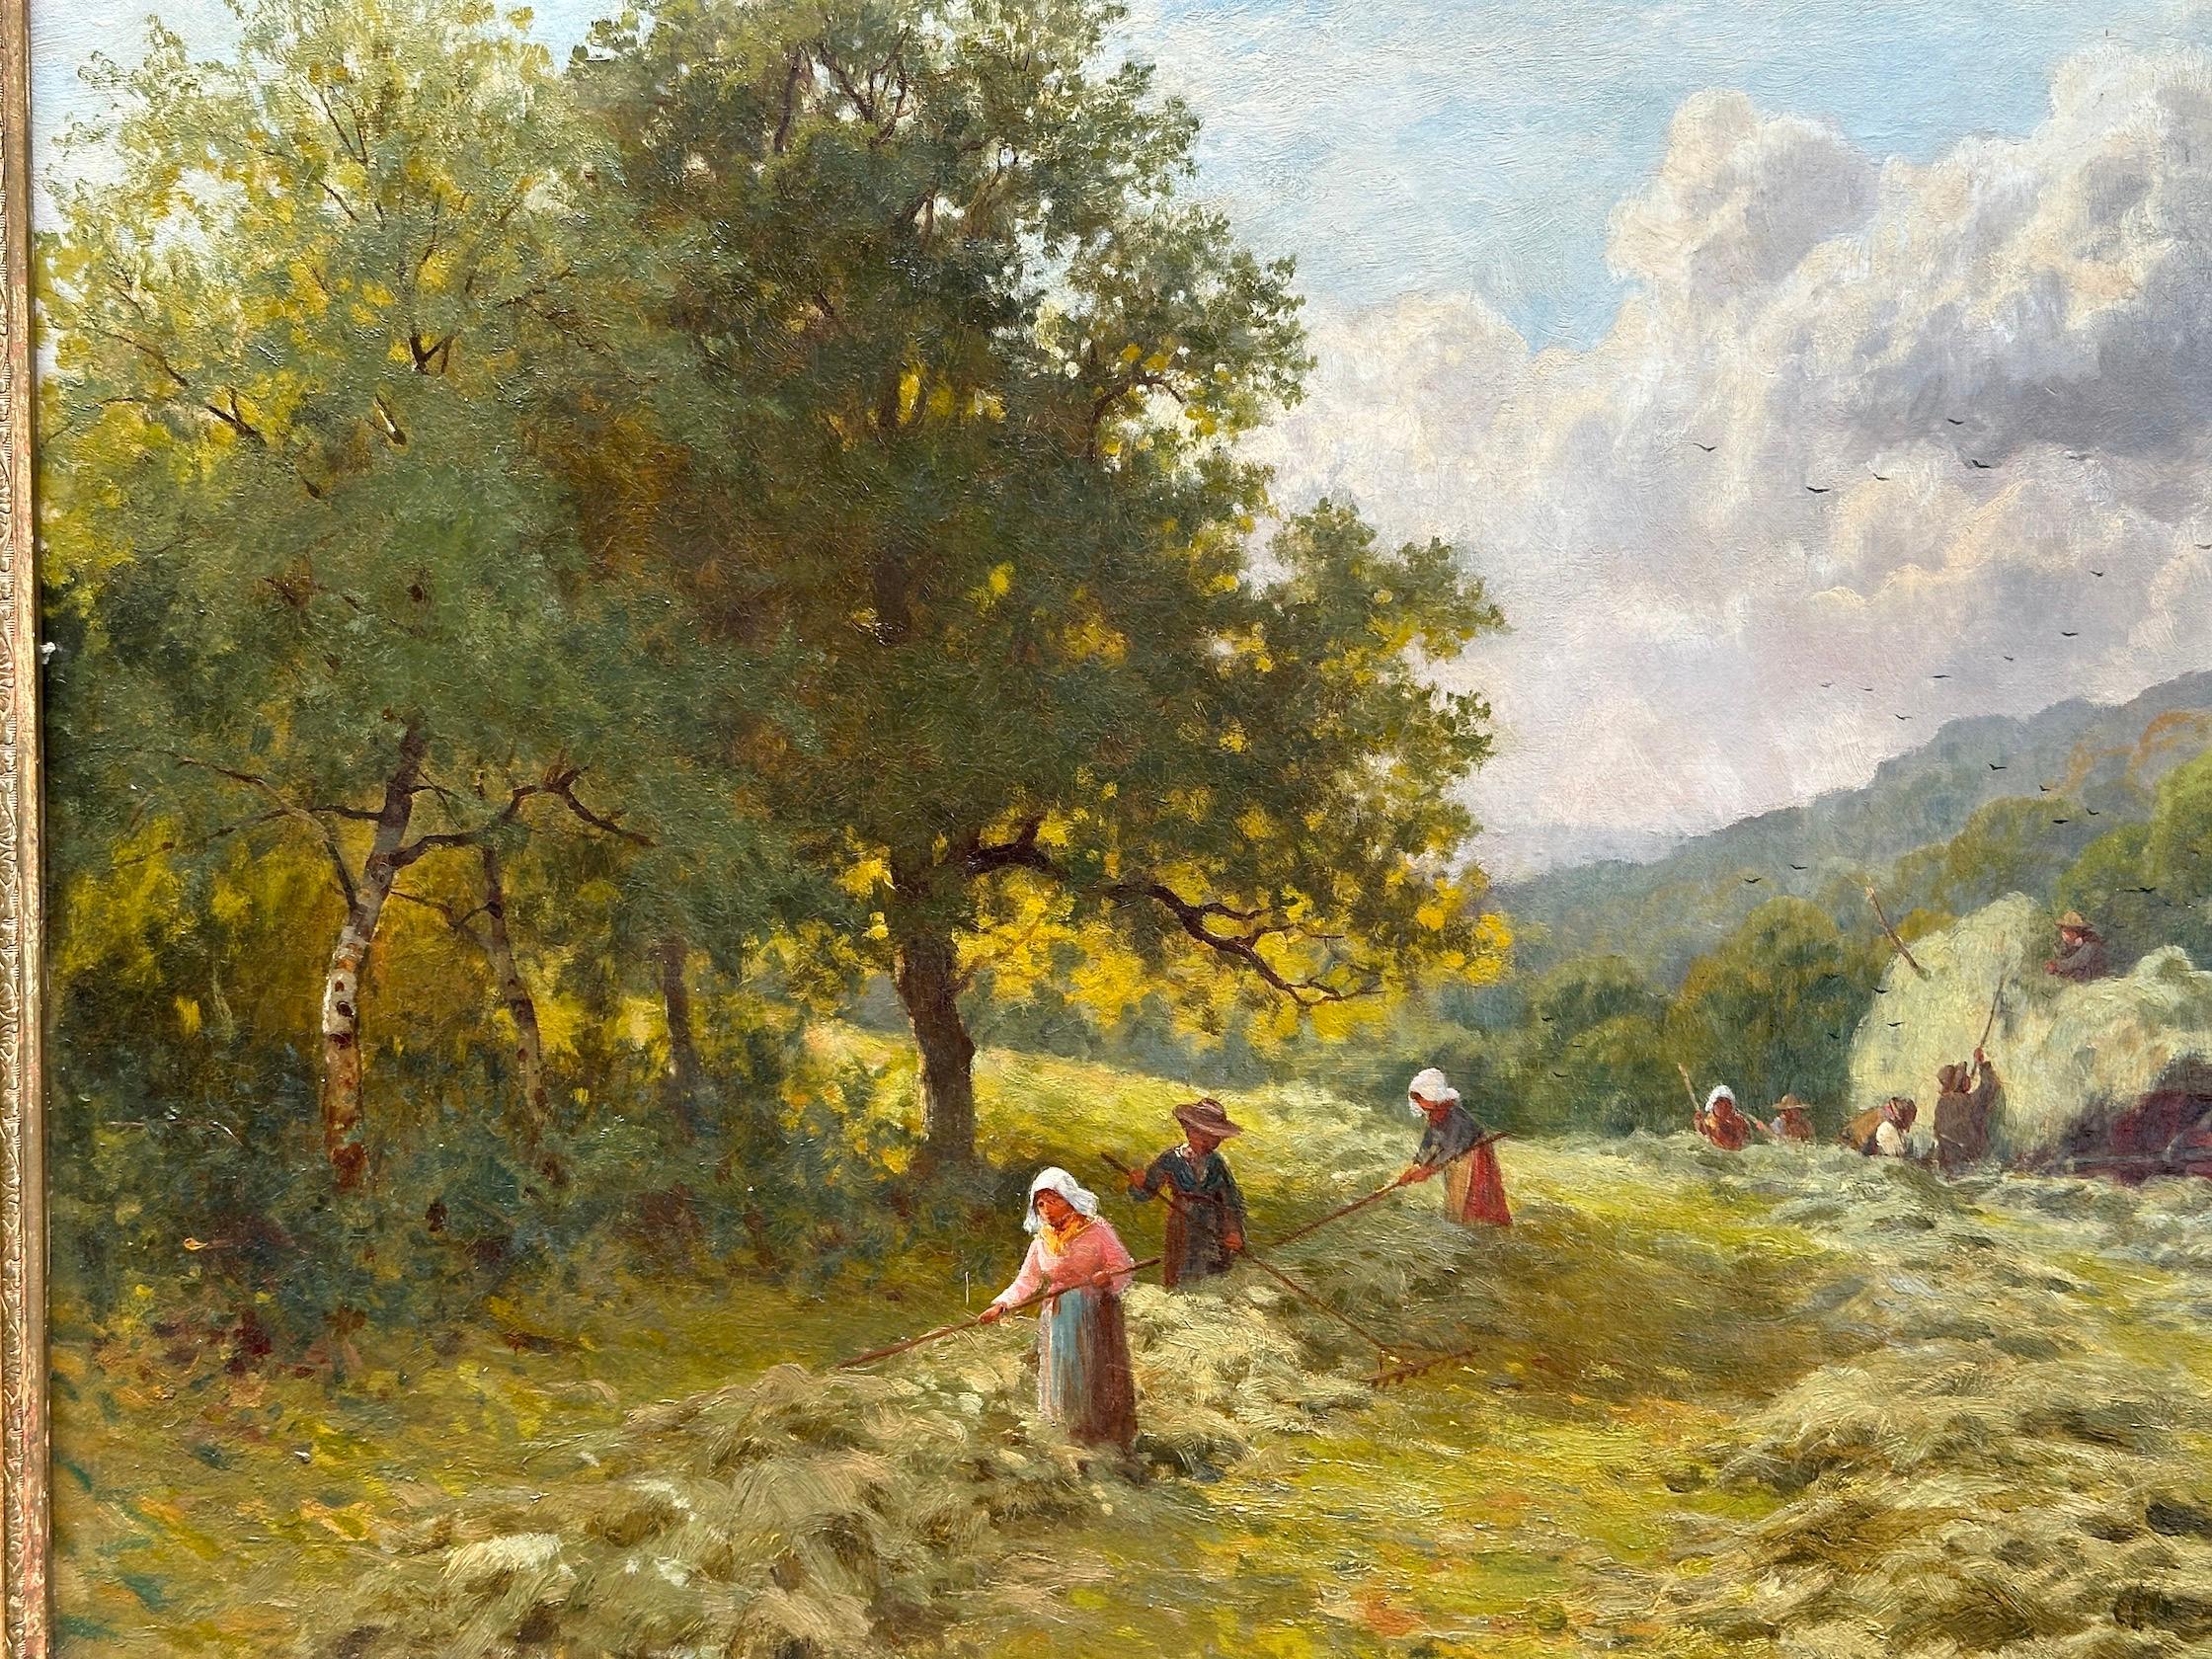 English Antique landscape with farmers harvesting in a field collecting hay - Painting by John Seymour Adams